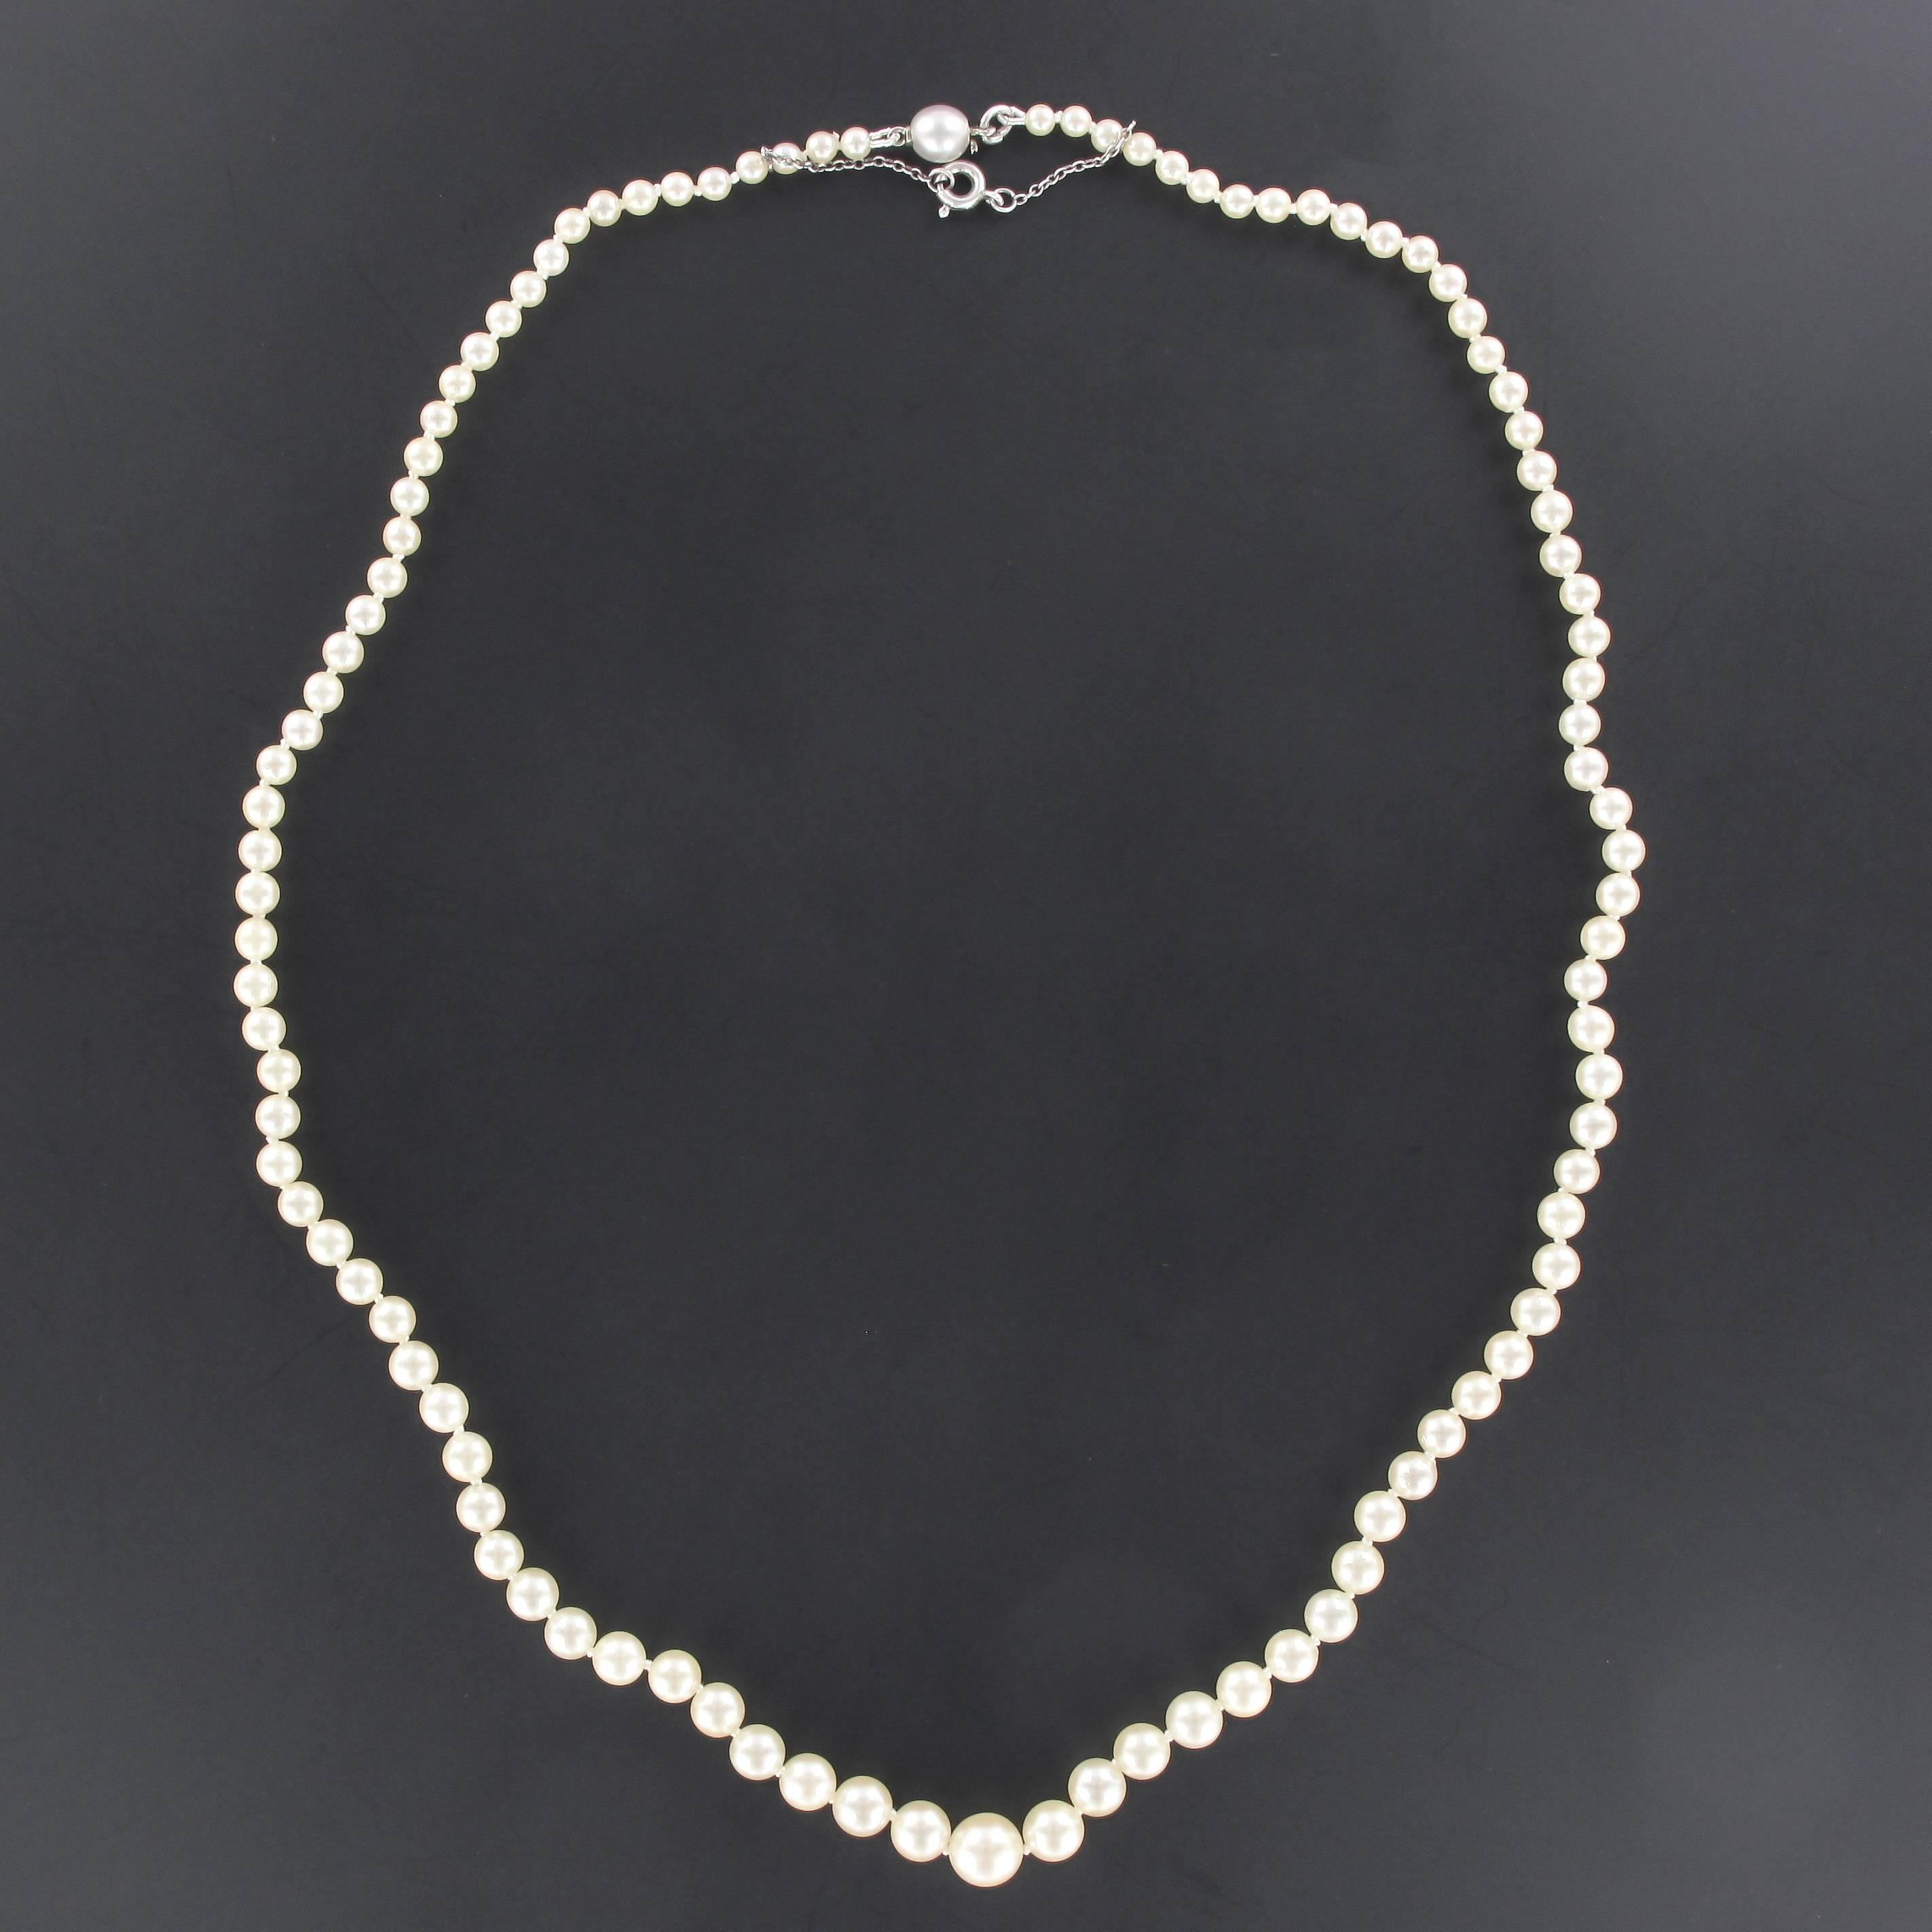 1930s Japanese Cultured Round White Pearl Necklace 4